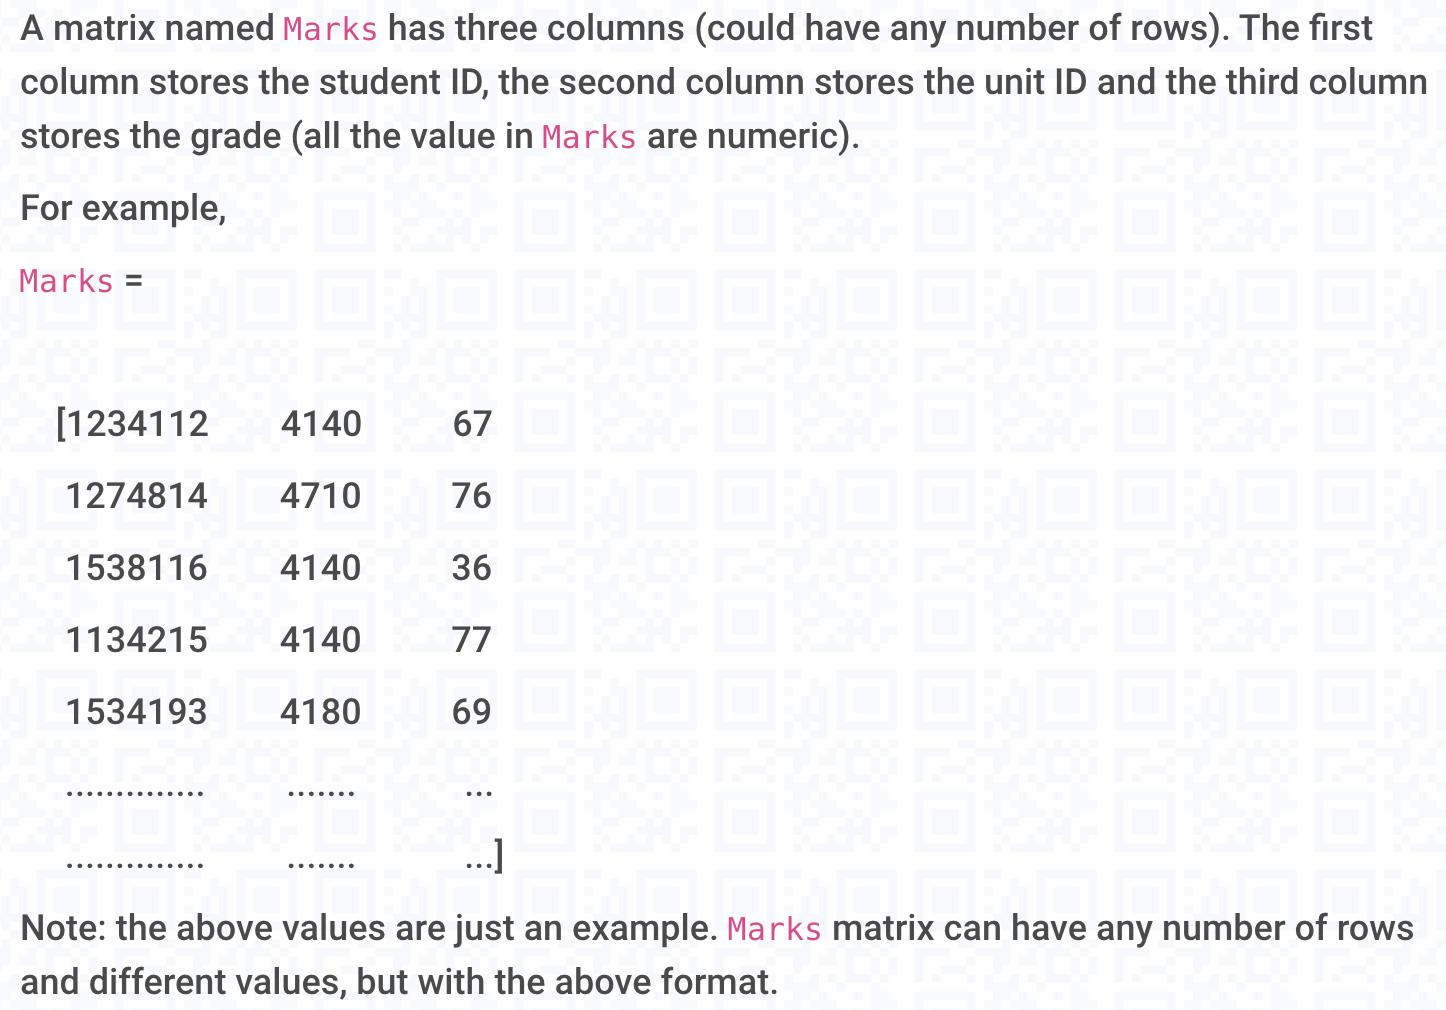 A matrix named Marks has three columns (could have any number of rows). The first column stores the student